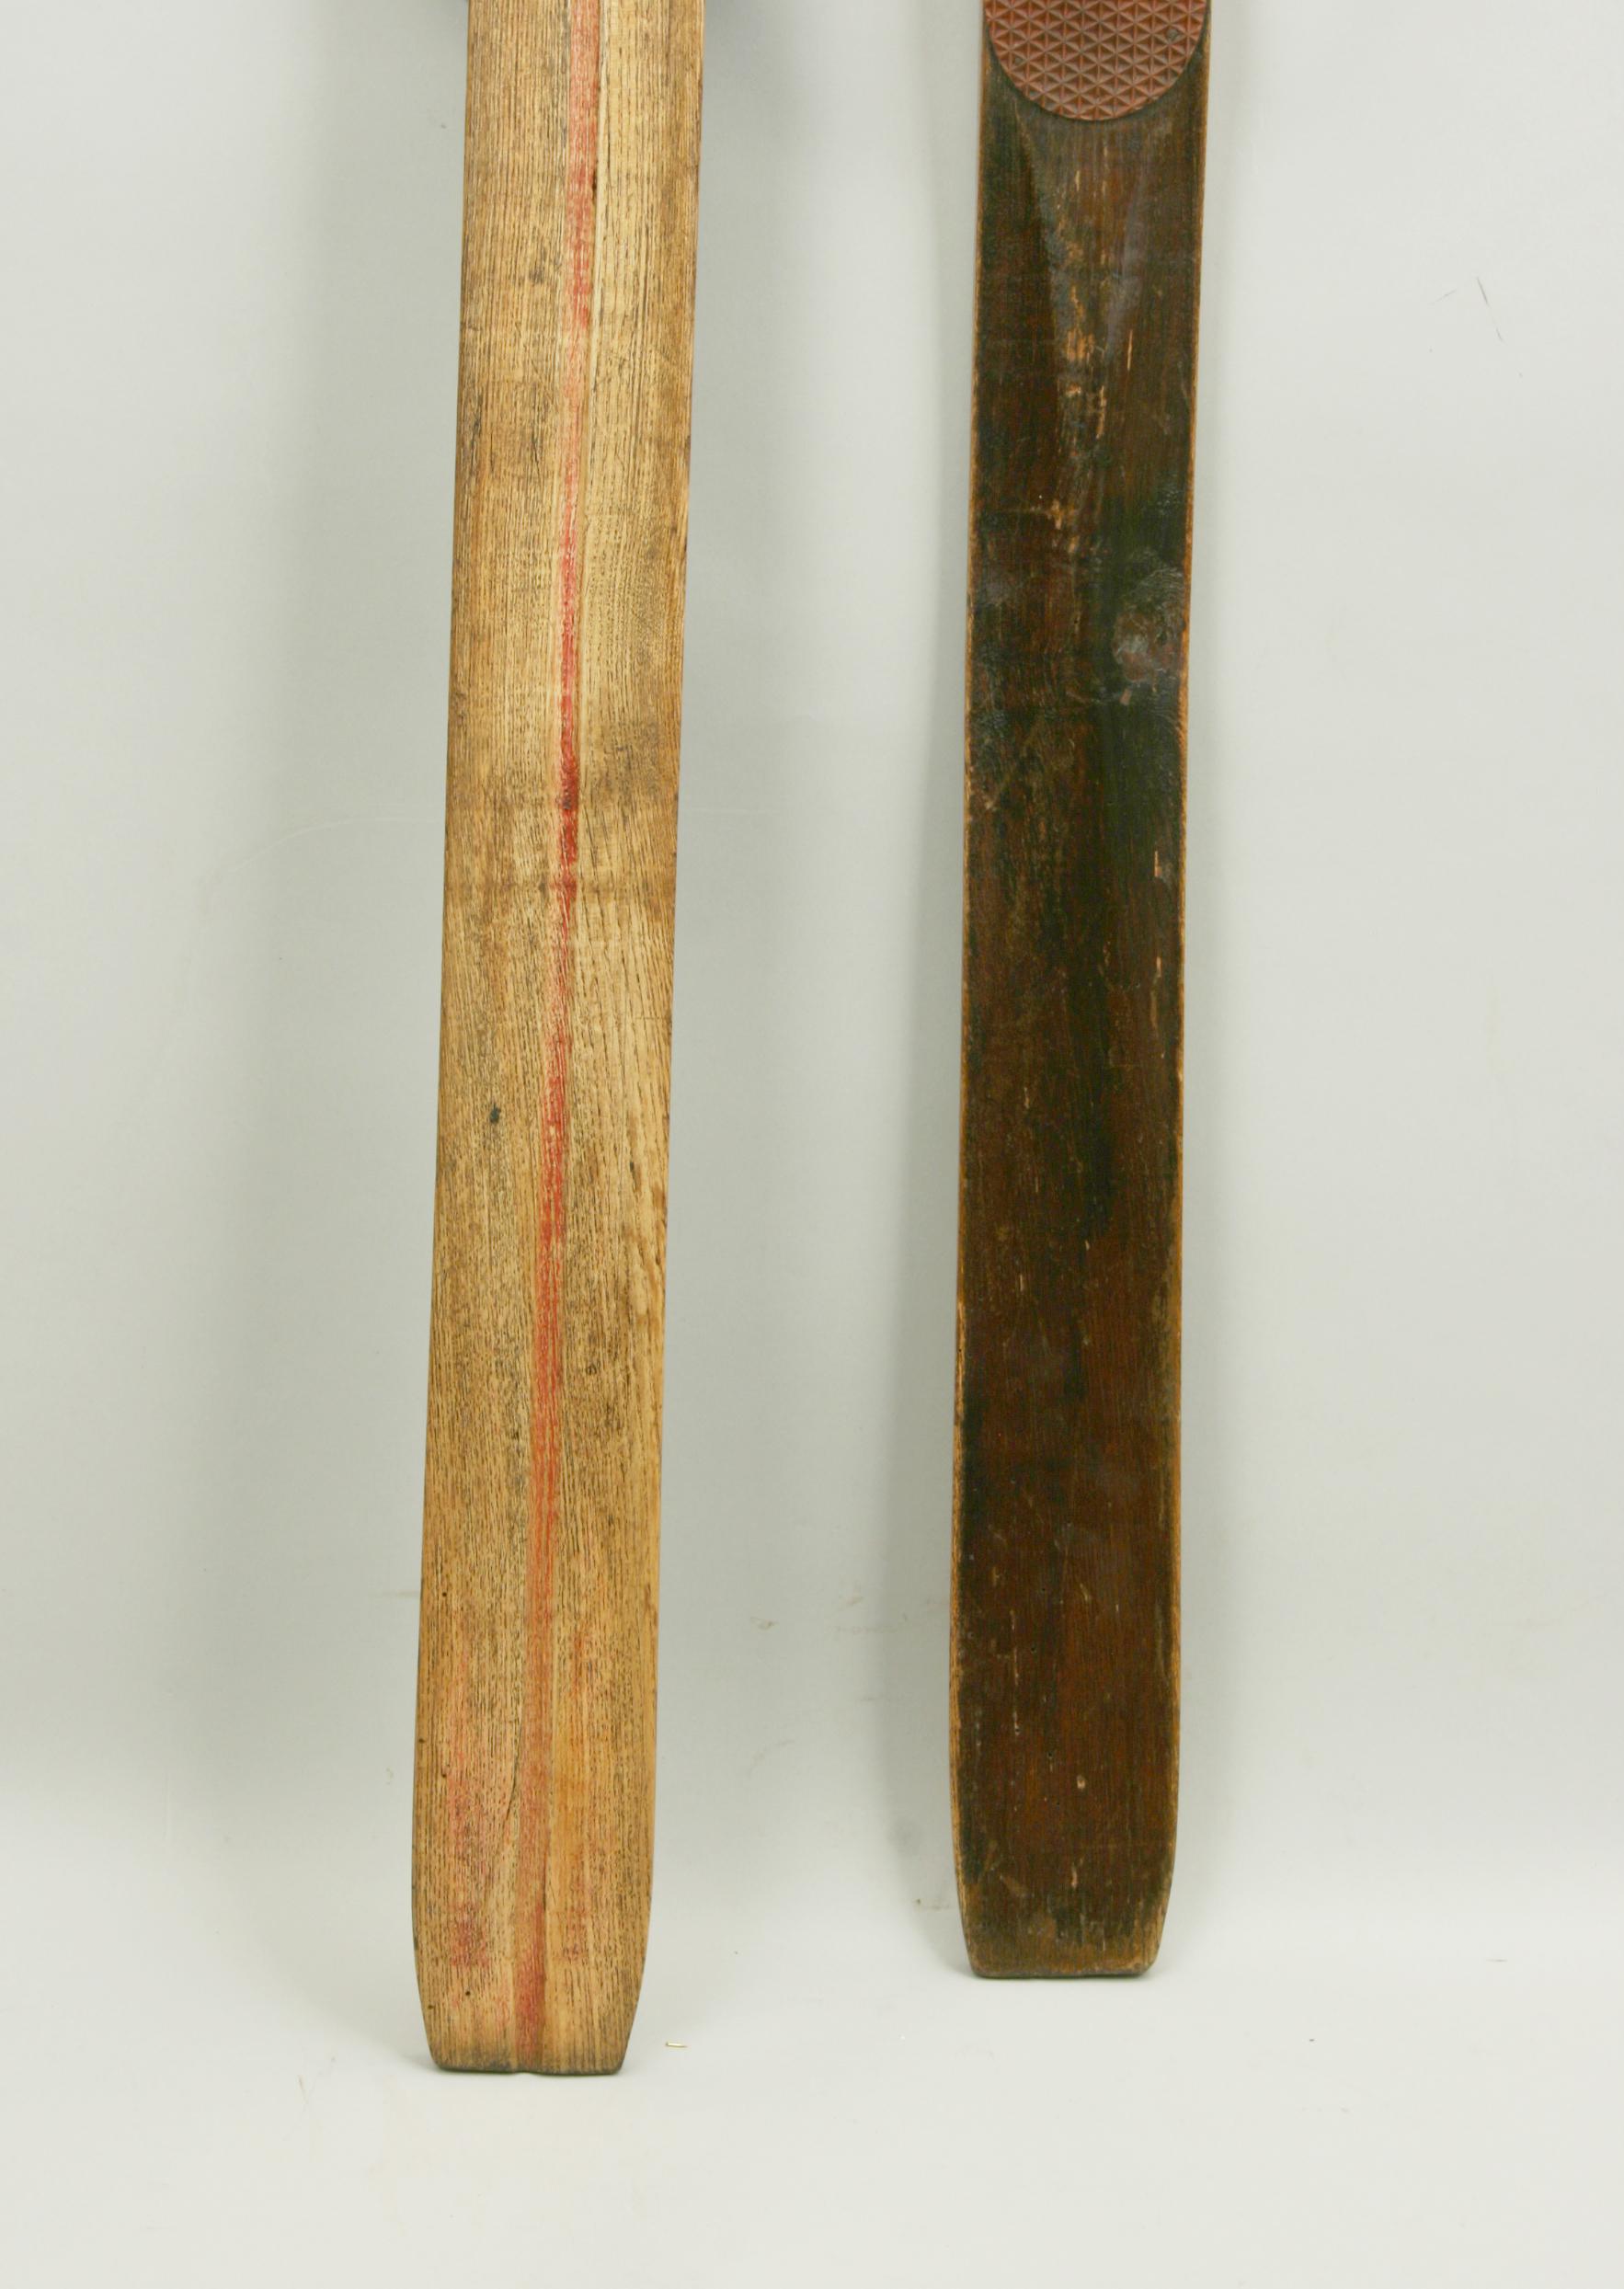 English Antique Ash Skis with Unique Oberhof Safety Bindings, Telemark Museum piece.